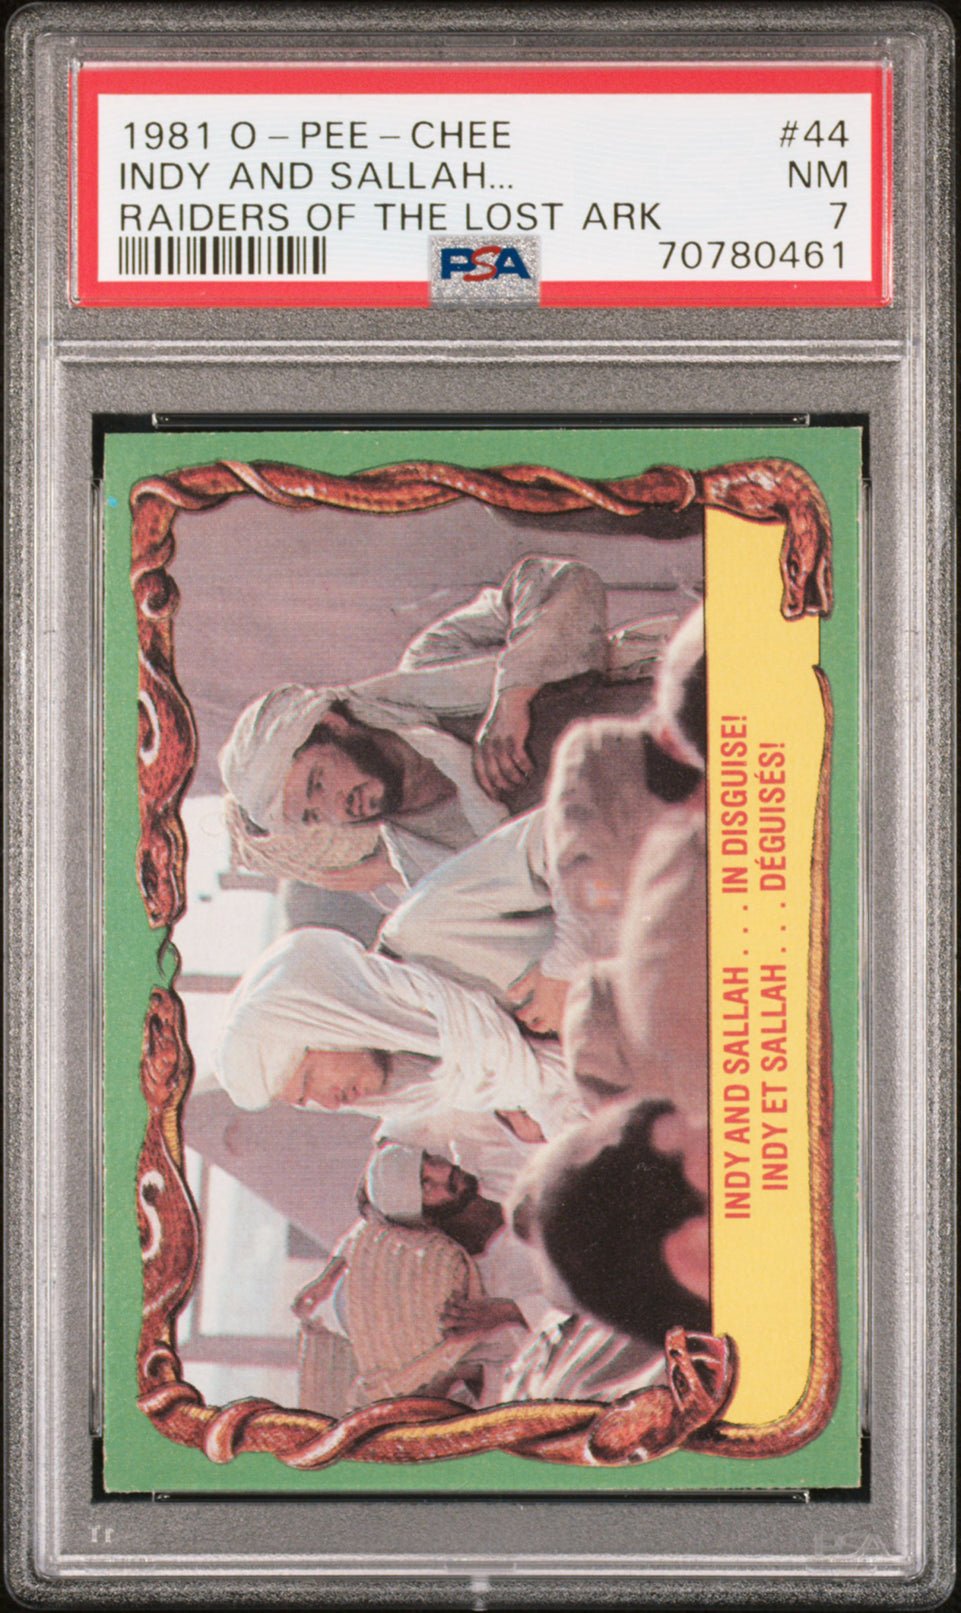 INDY AND SALLAH...IN DISGUISE! PSA 7 1981 O-Pee-Chee Raiders of the Lost Ark #44 Indiana Jones Base Graded Cards - Hobby Gems